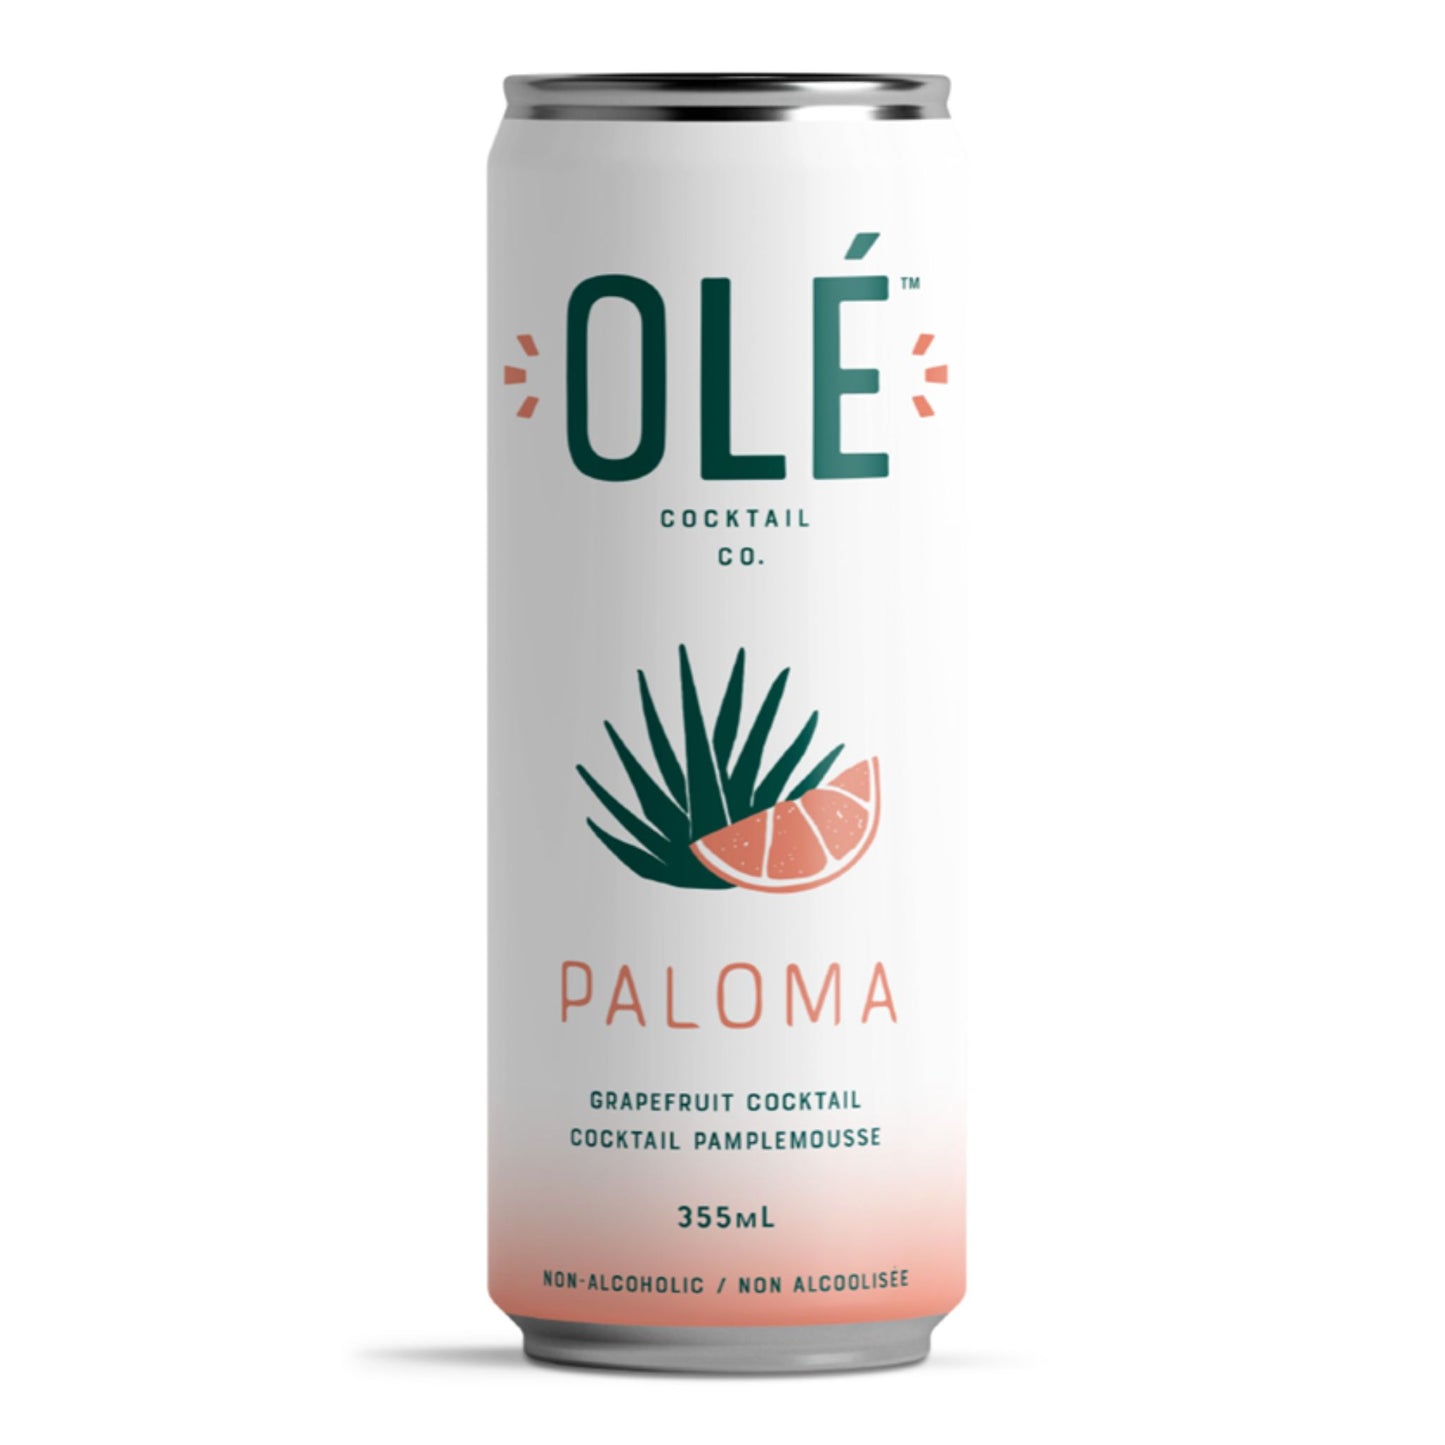 Ole Cocktail Non-Alcoholic Paloma is available at Knyota Non-Alcoholic Drinks.